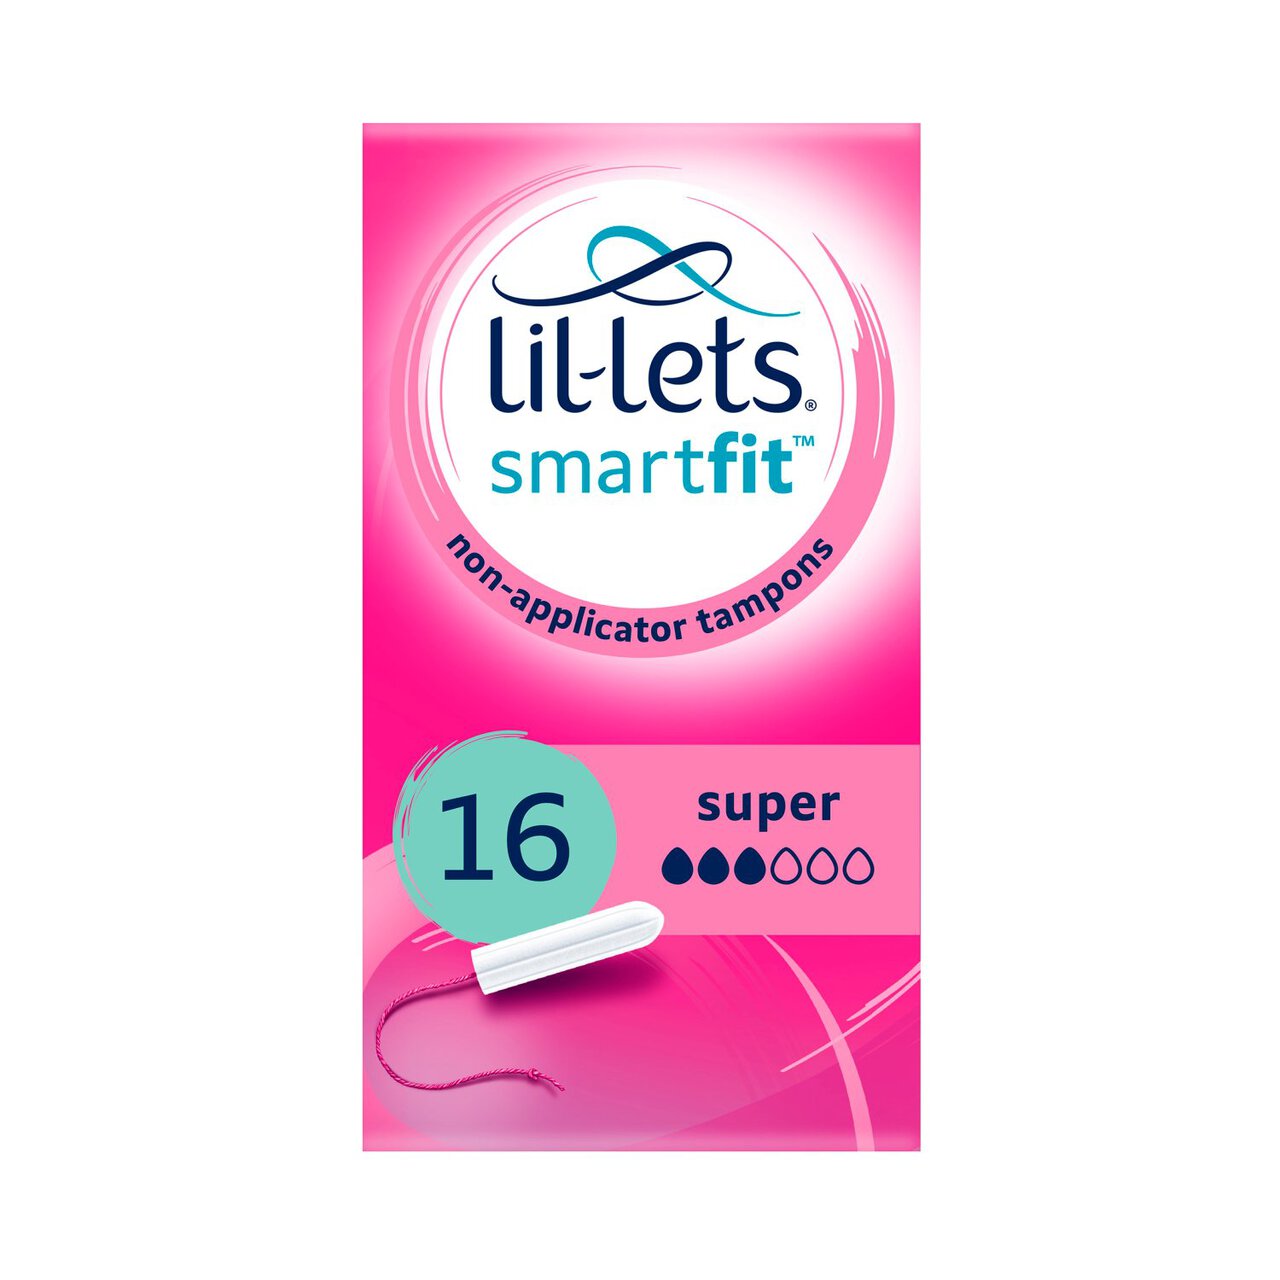 Lil-Lets Super Non-Applicator Tampons 16 per pack